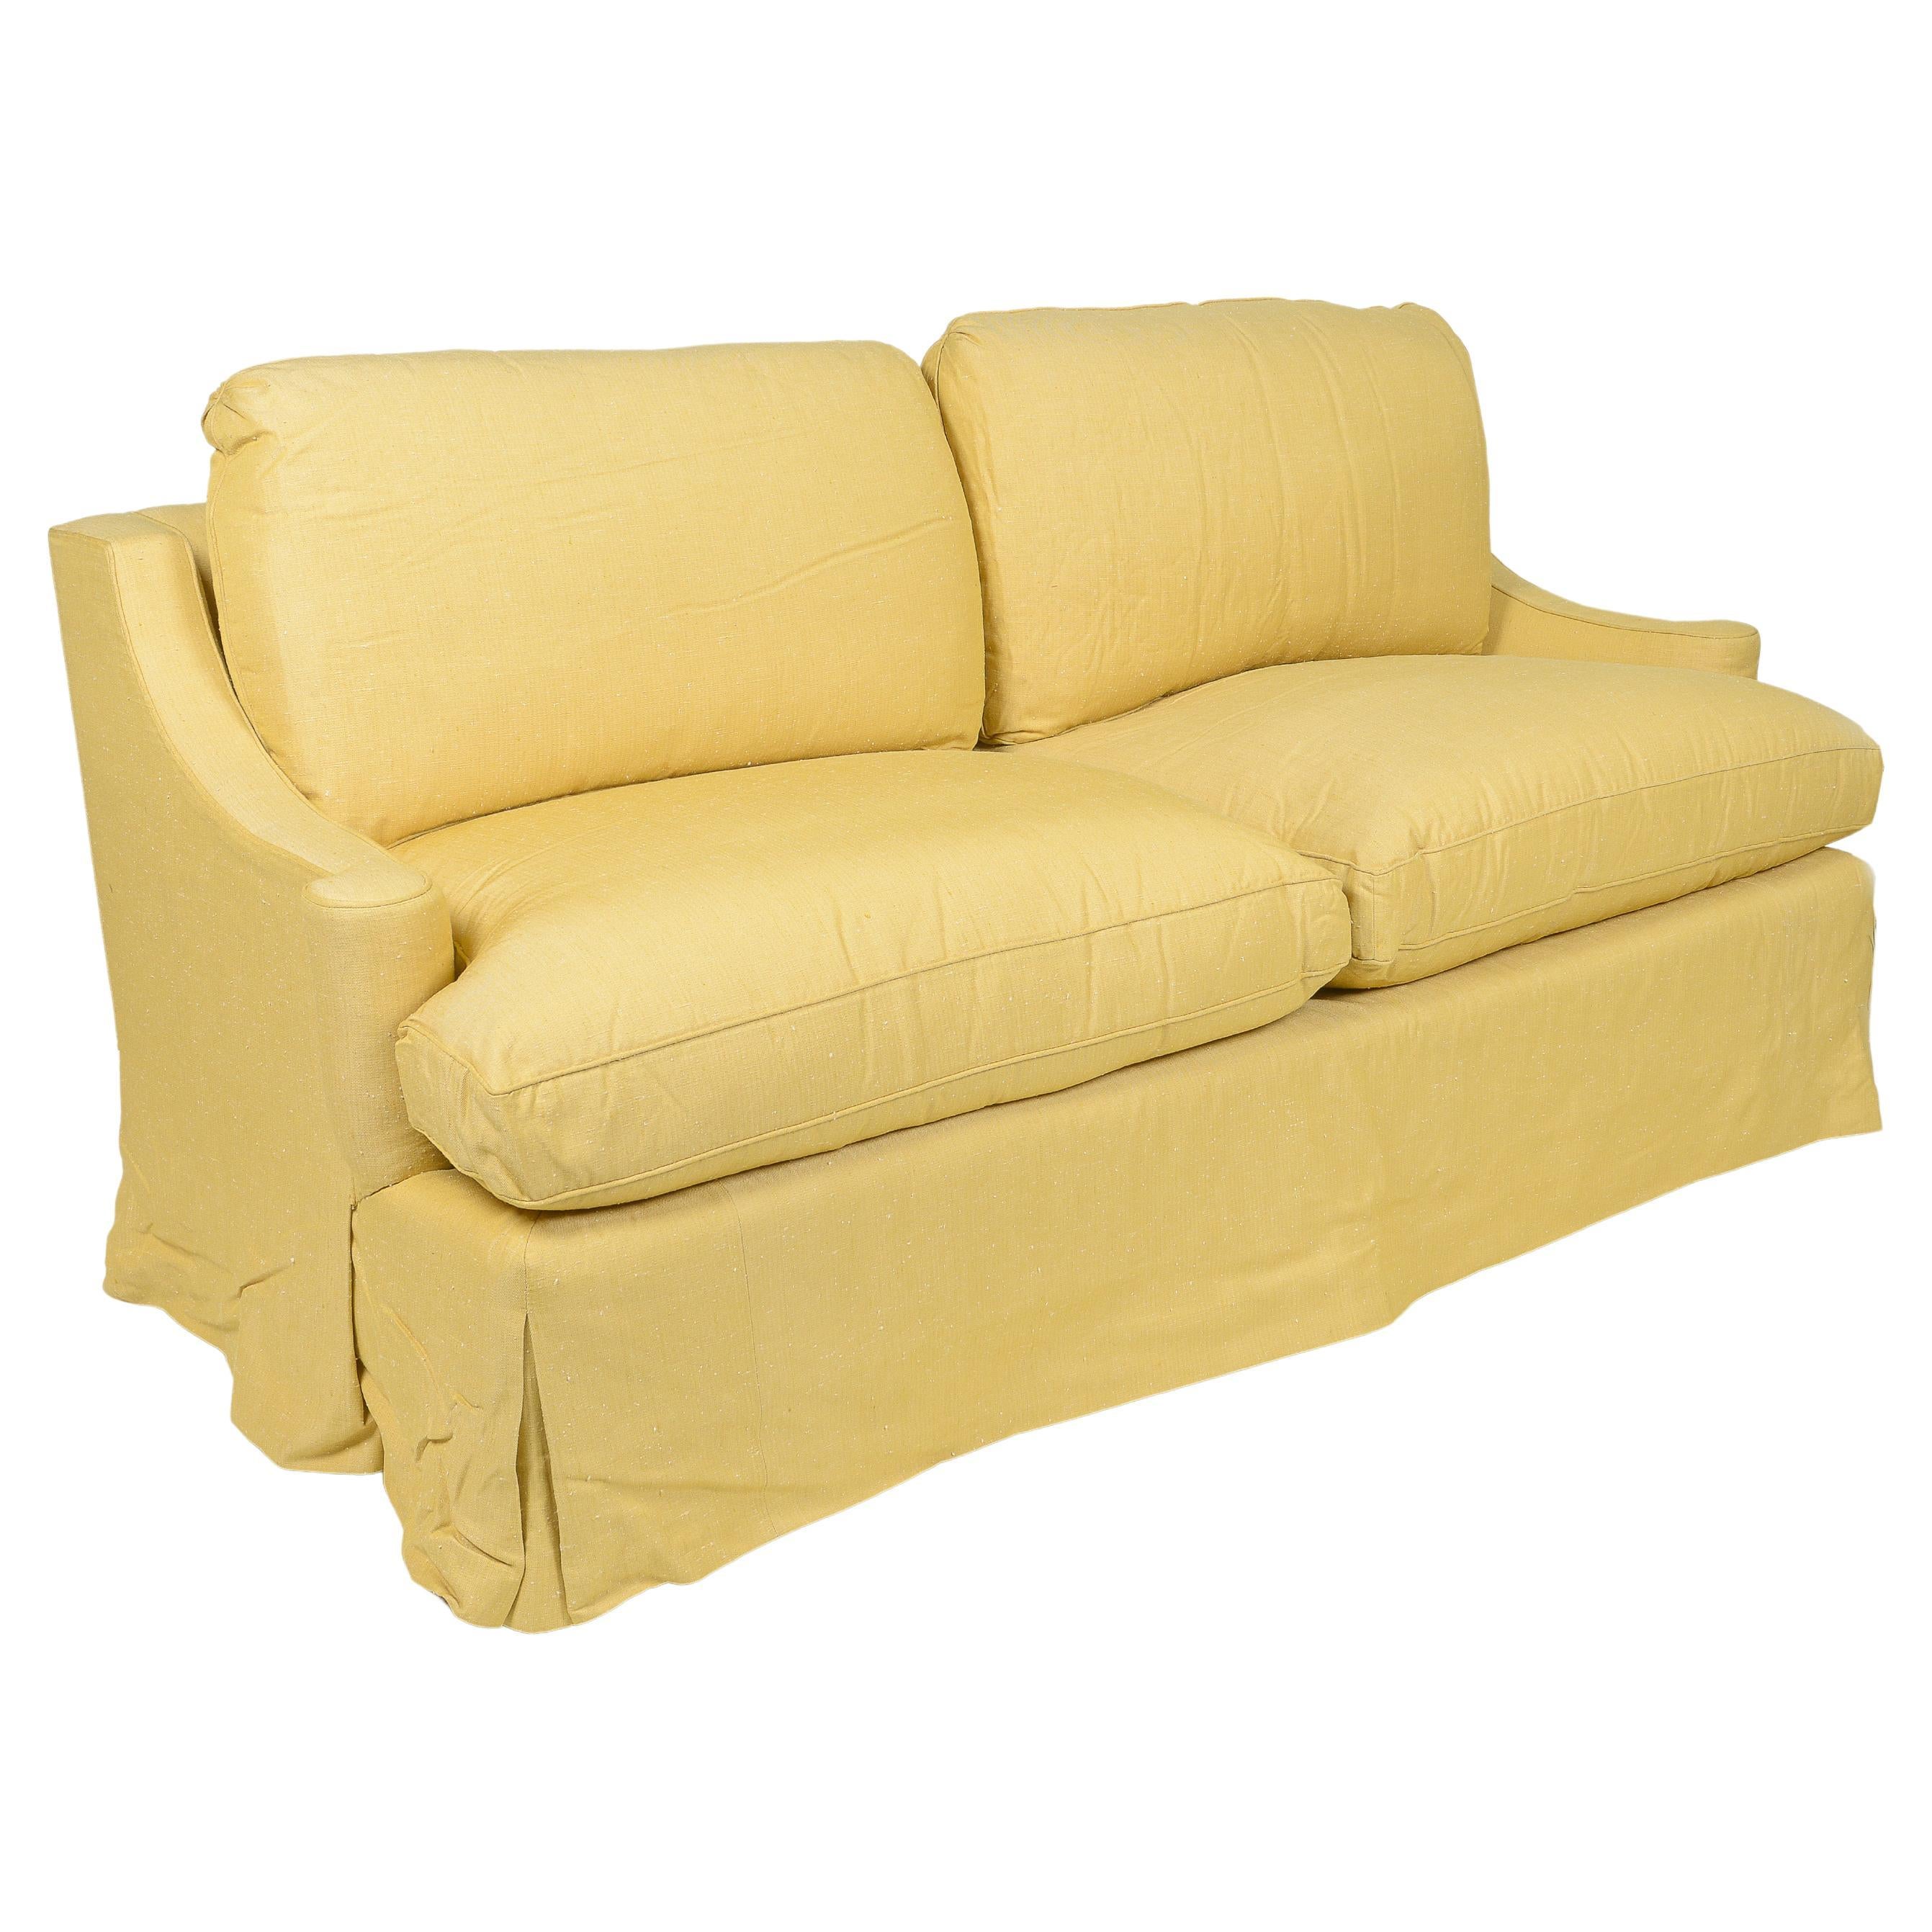 DeAngelis Silk Two-Seater Sofa For Sale